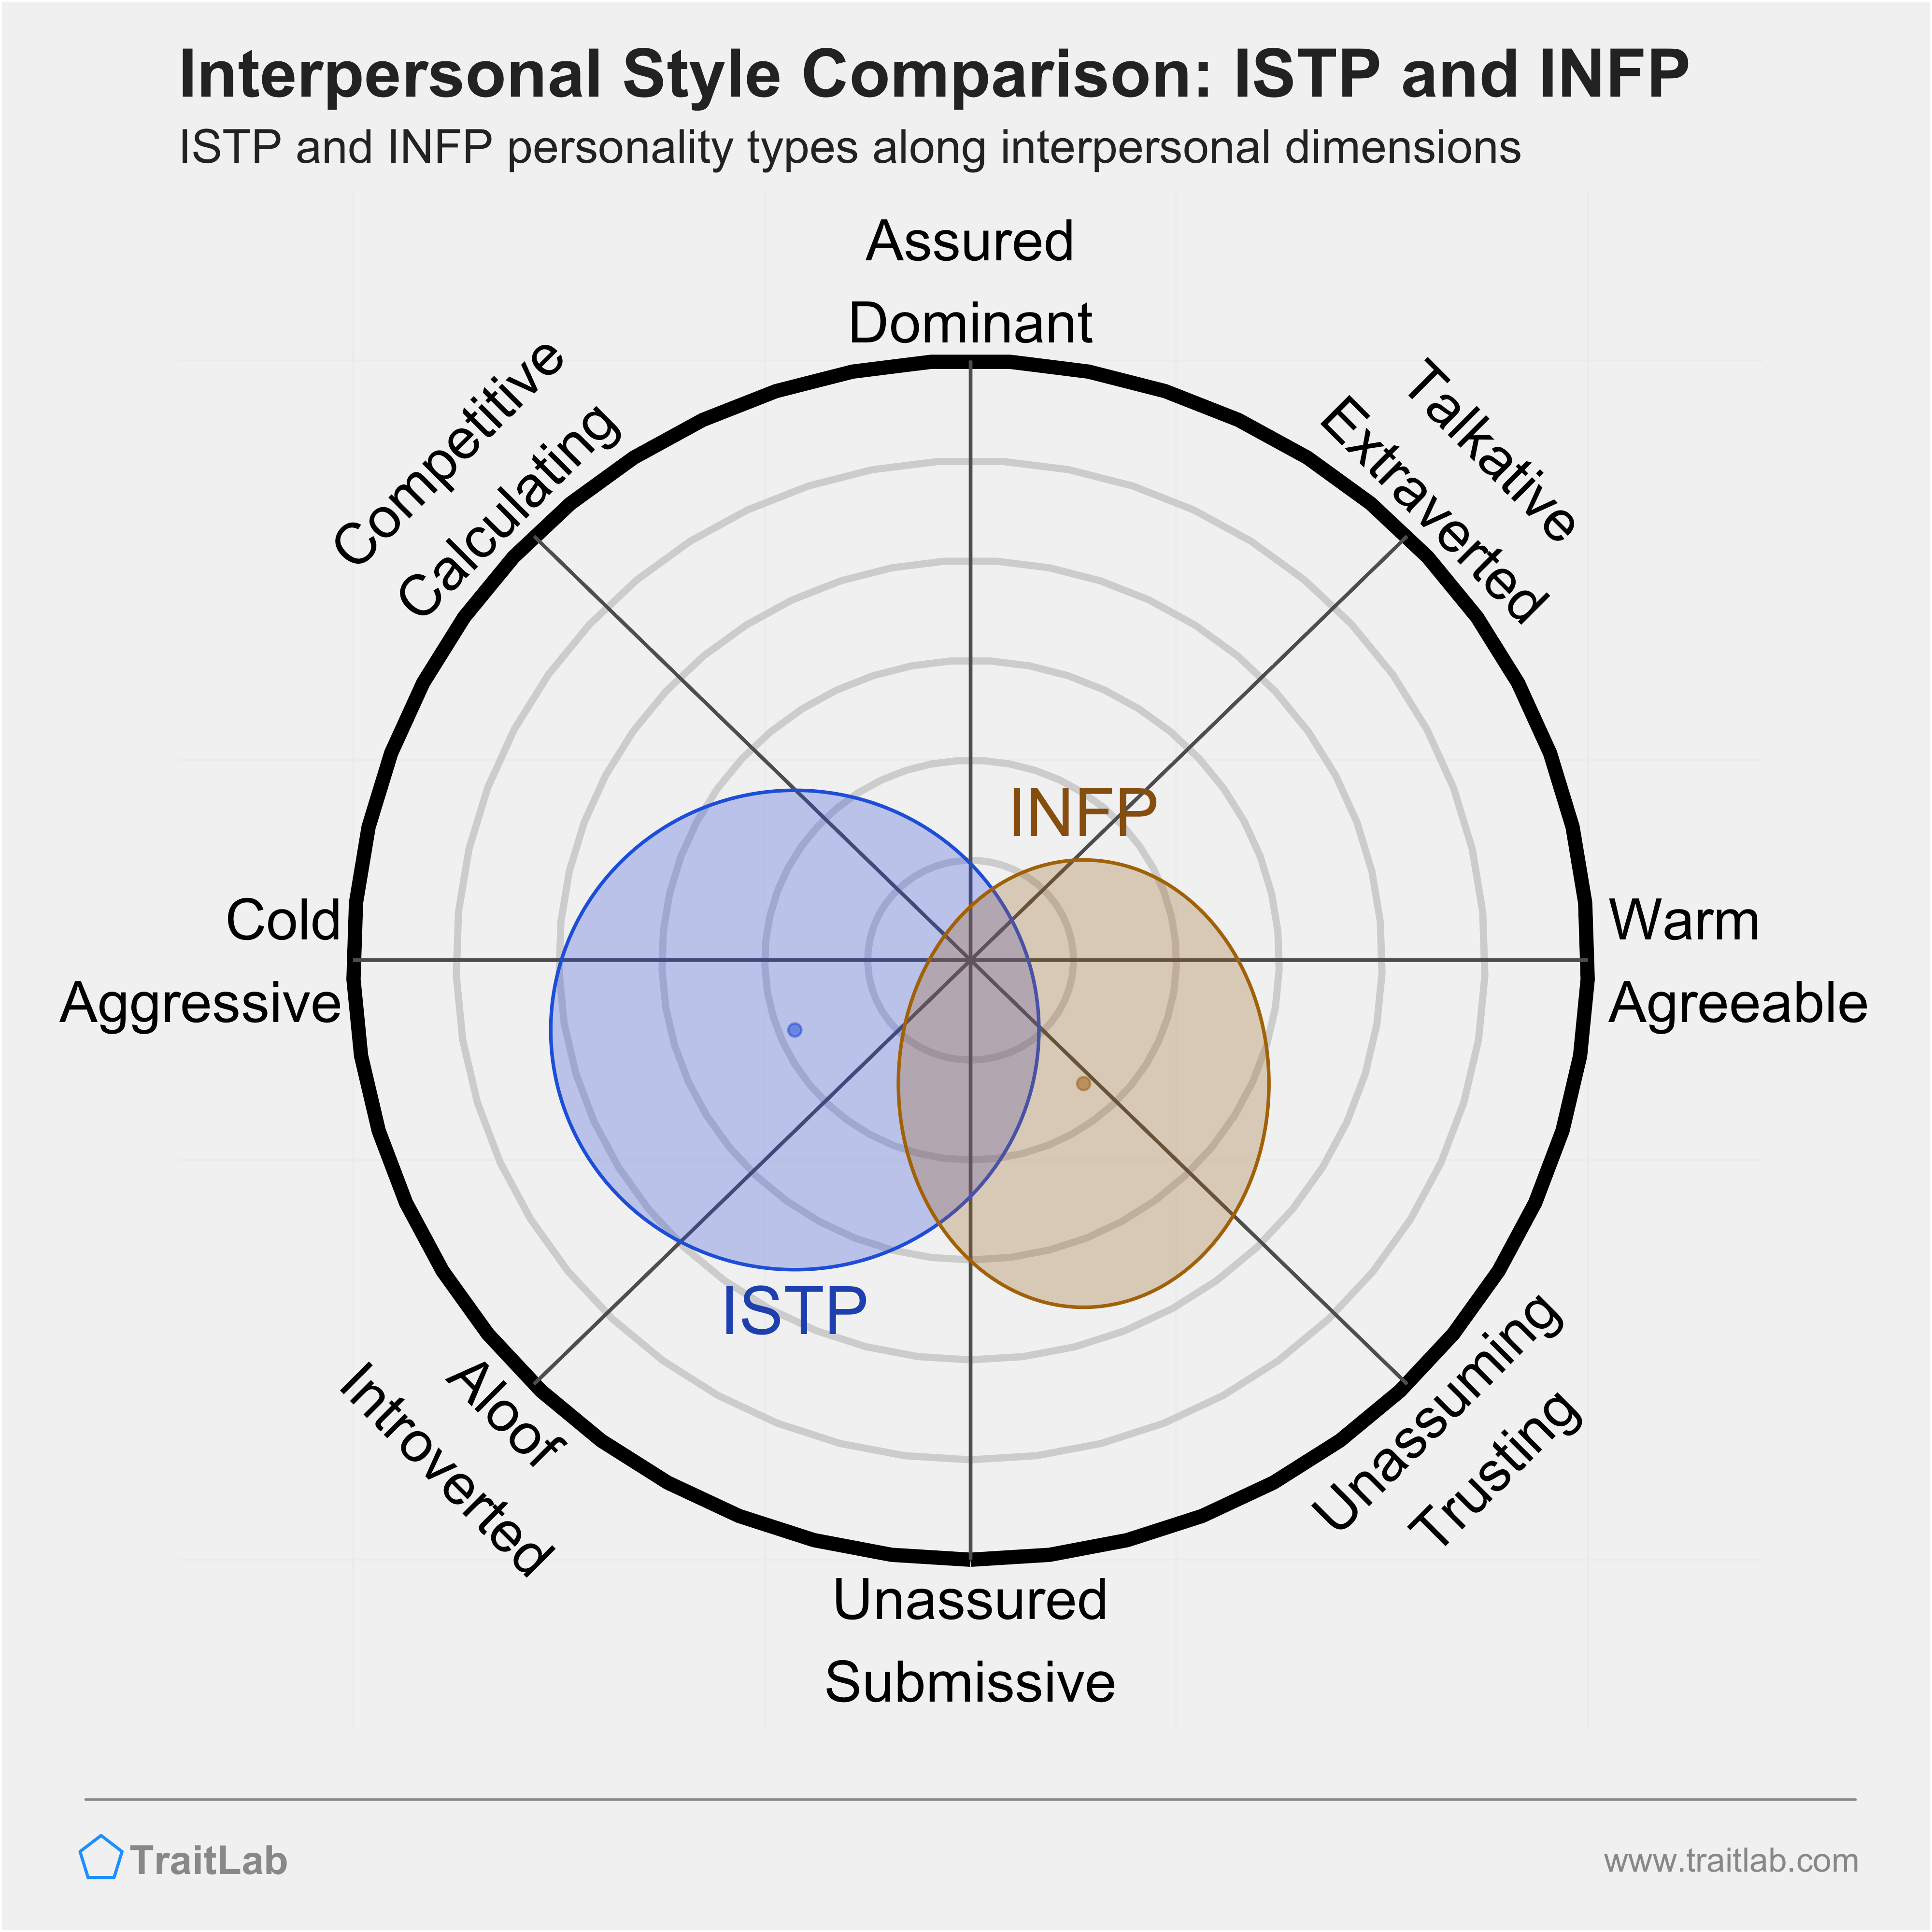 ISTP and INFP comparison across interpersonal dimensions